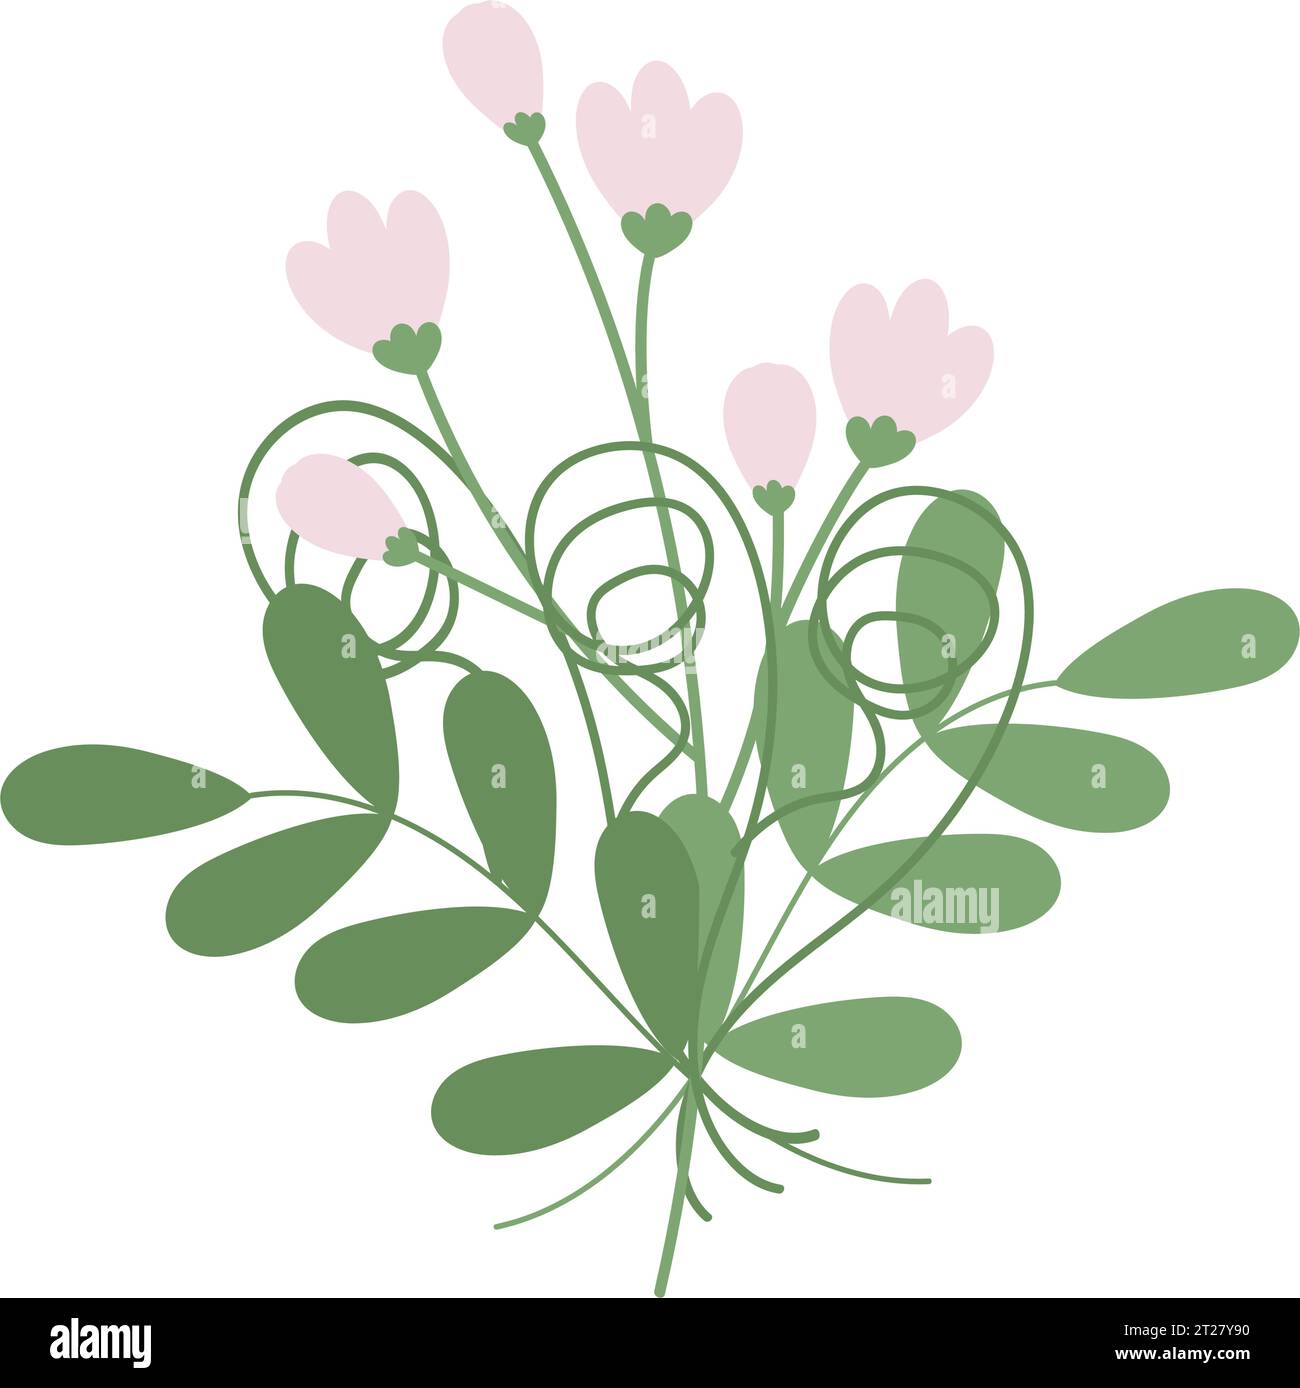 Climbing Plants Wall Art for Sale | Redbubble